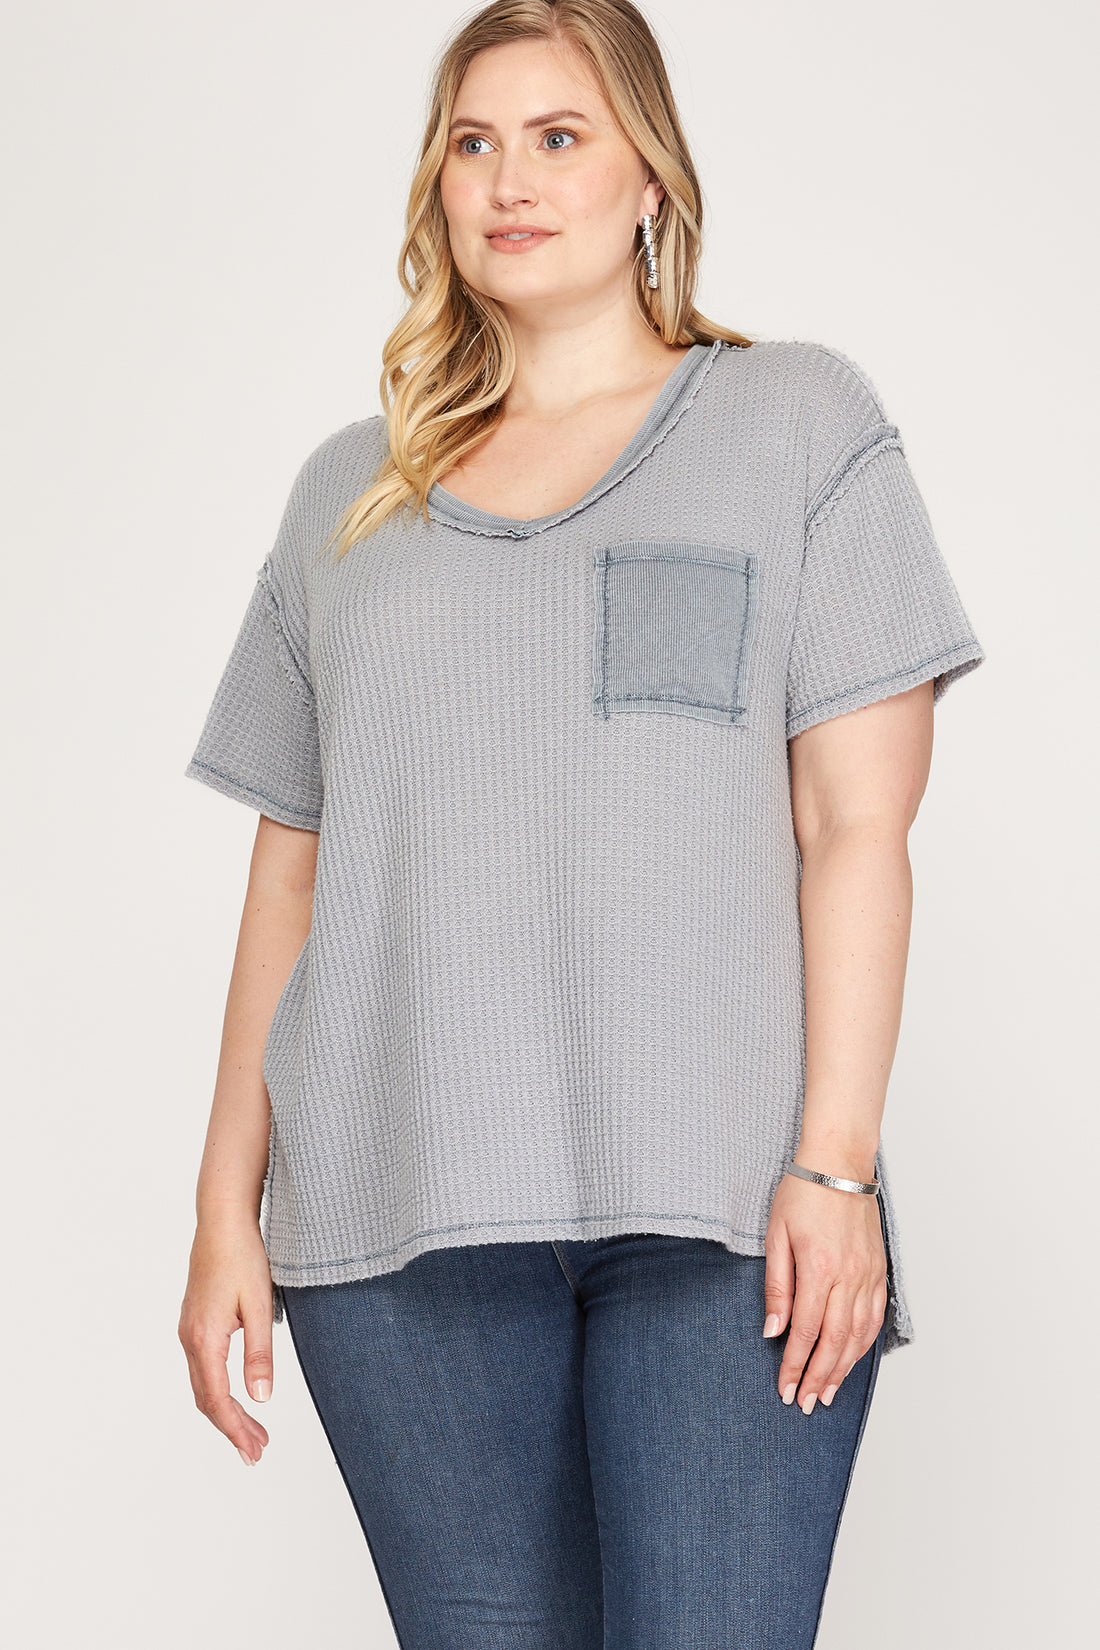 PLUS The Ava Grey Thermal Knit Top